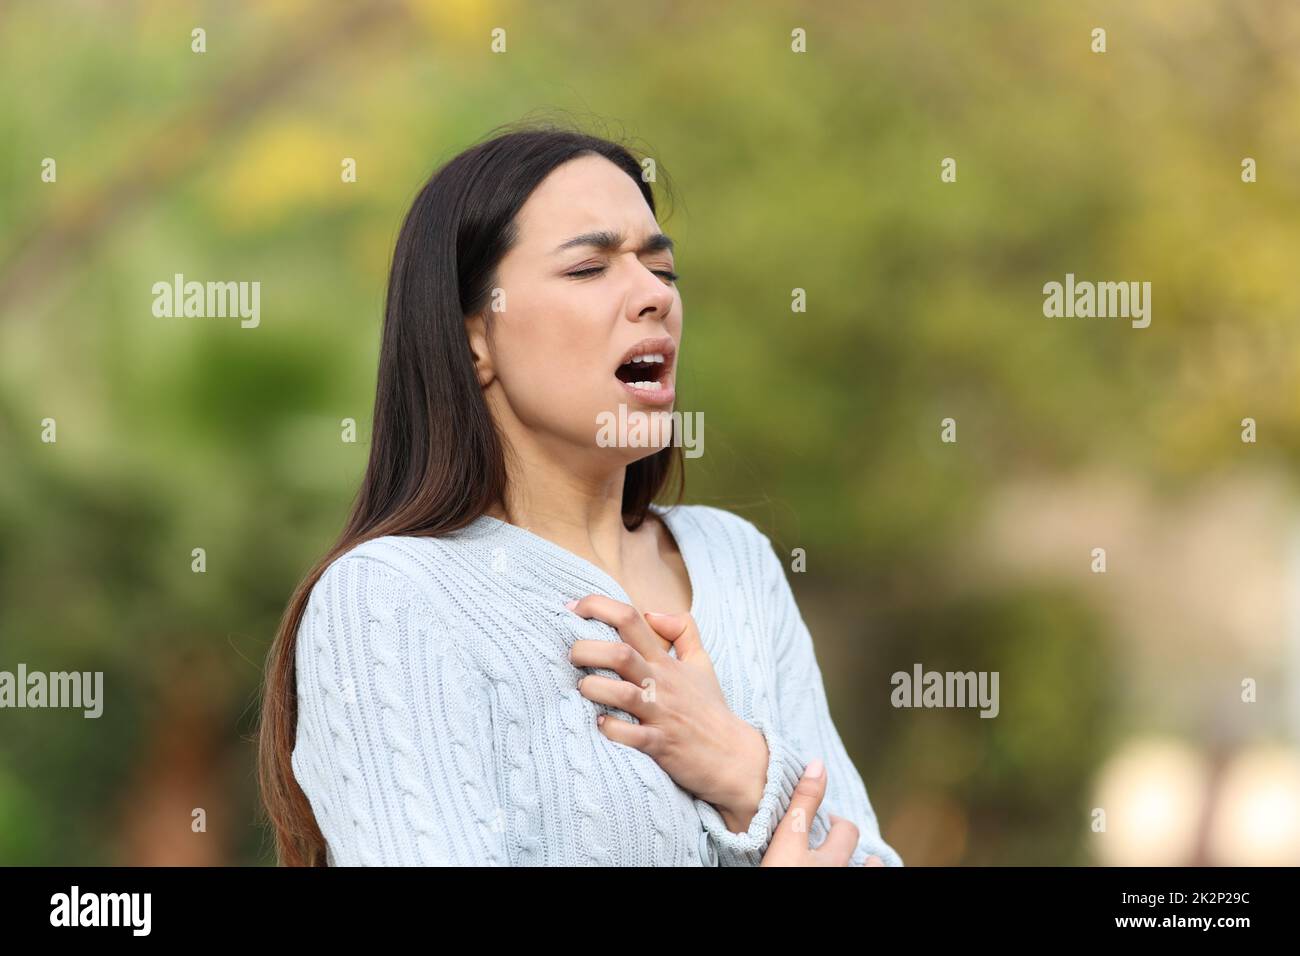 Woman having breath problems in a park Stock Photo